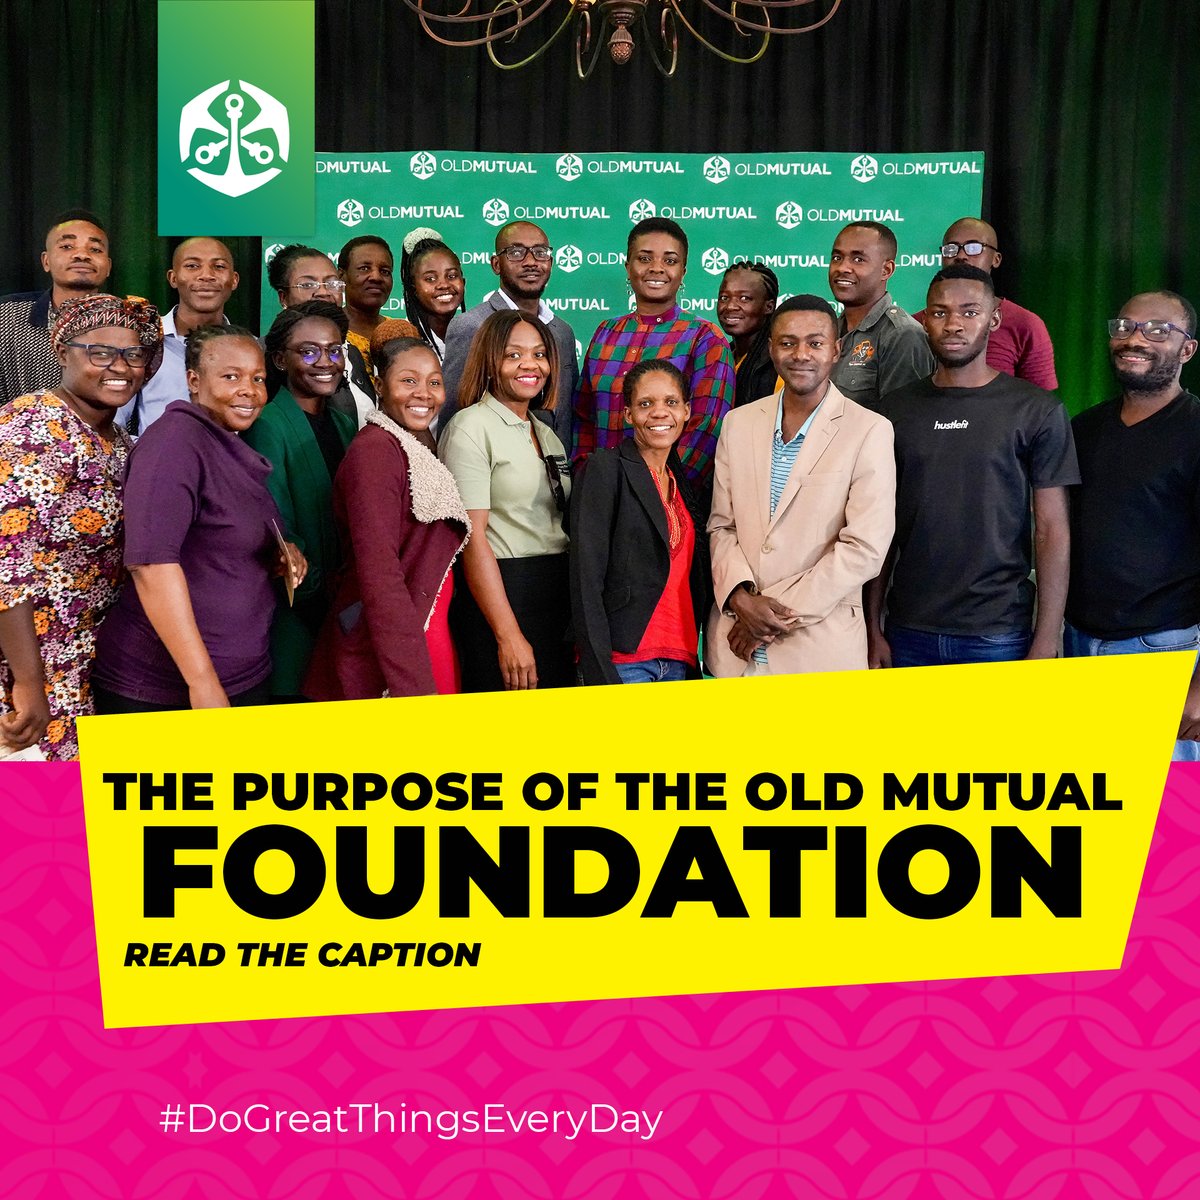 The Old Mutual Foundation's mission is crystal clear. We aim to unleash the power of financial freedom and community magic. 
#OldMutualFoundation #FinancialFreedom #CommunityMagic #MakeWaves